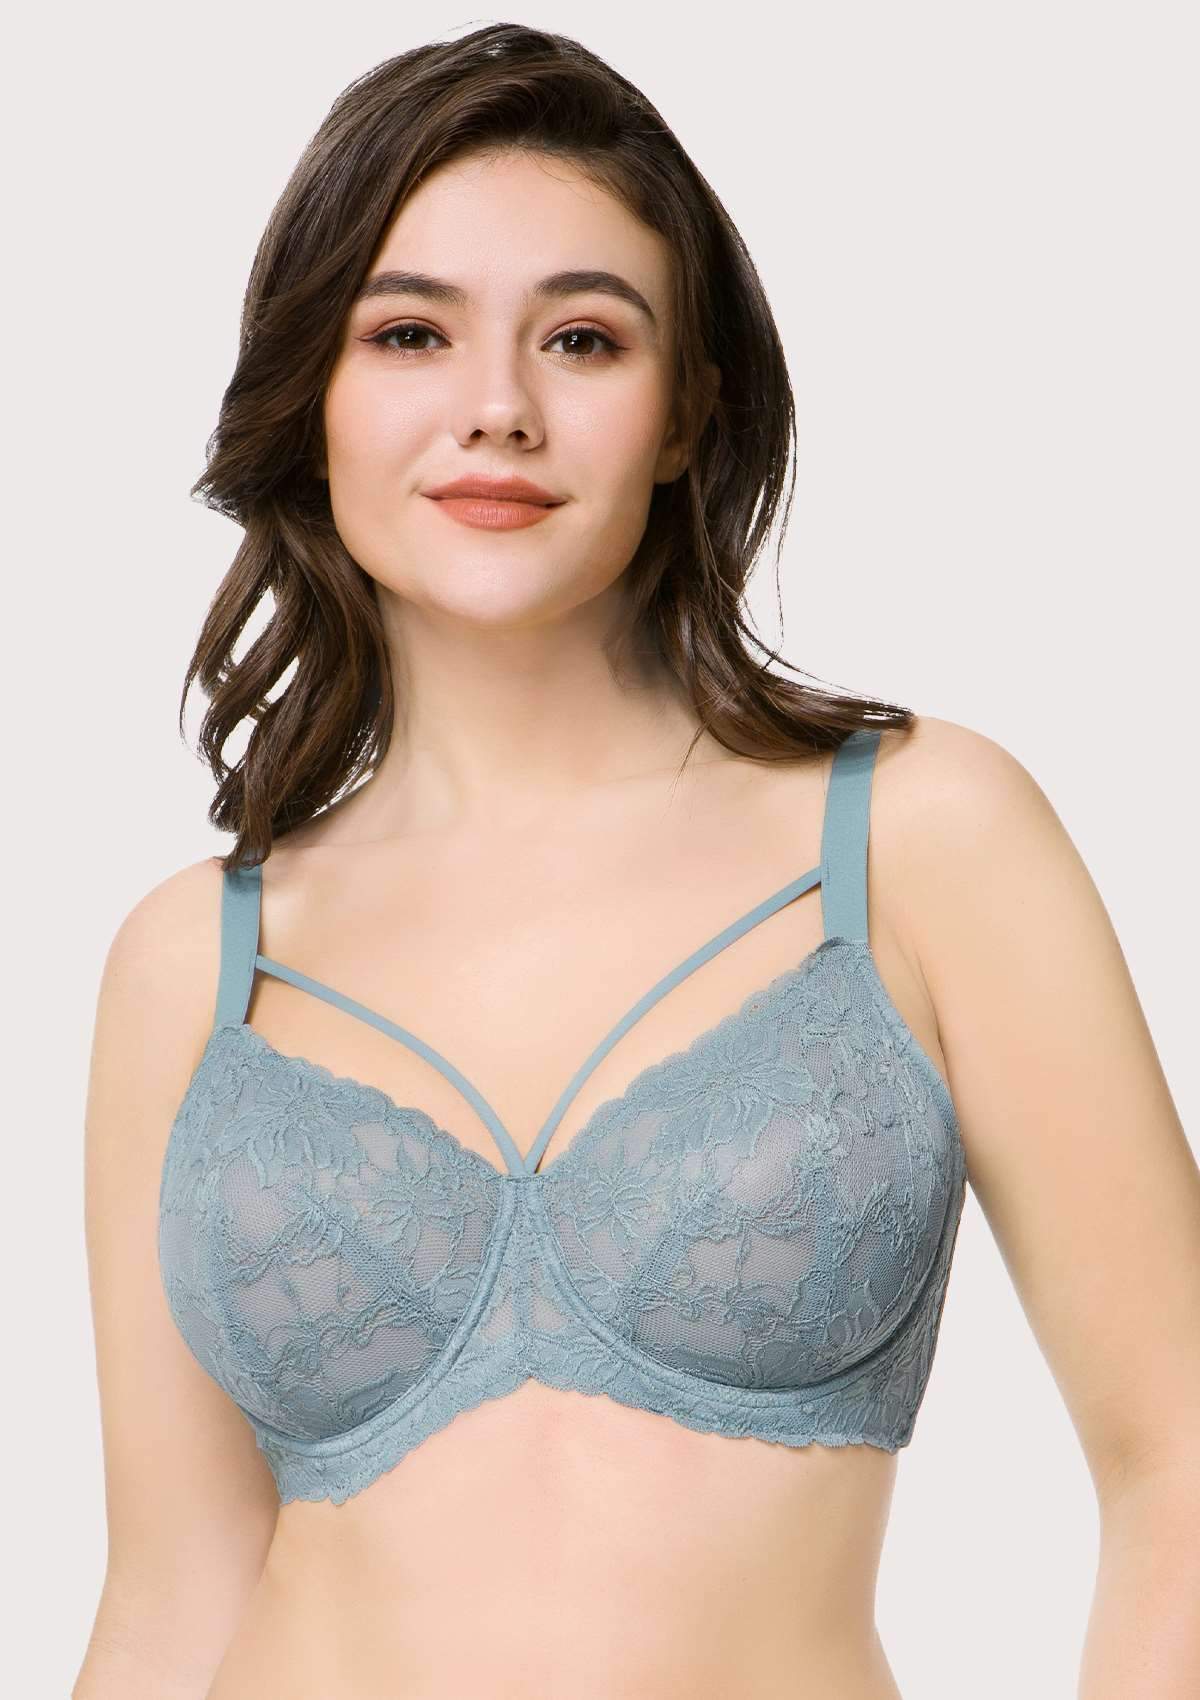 HSIA Pretty In Petals Unlined Lace Bra: Comfortable And Supportive Bra - Crystal Blue / 34 / DDD/F